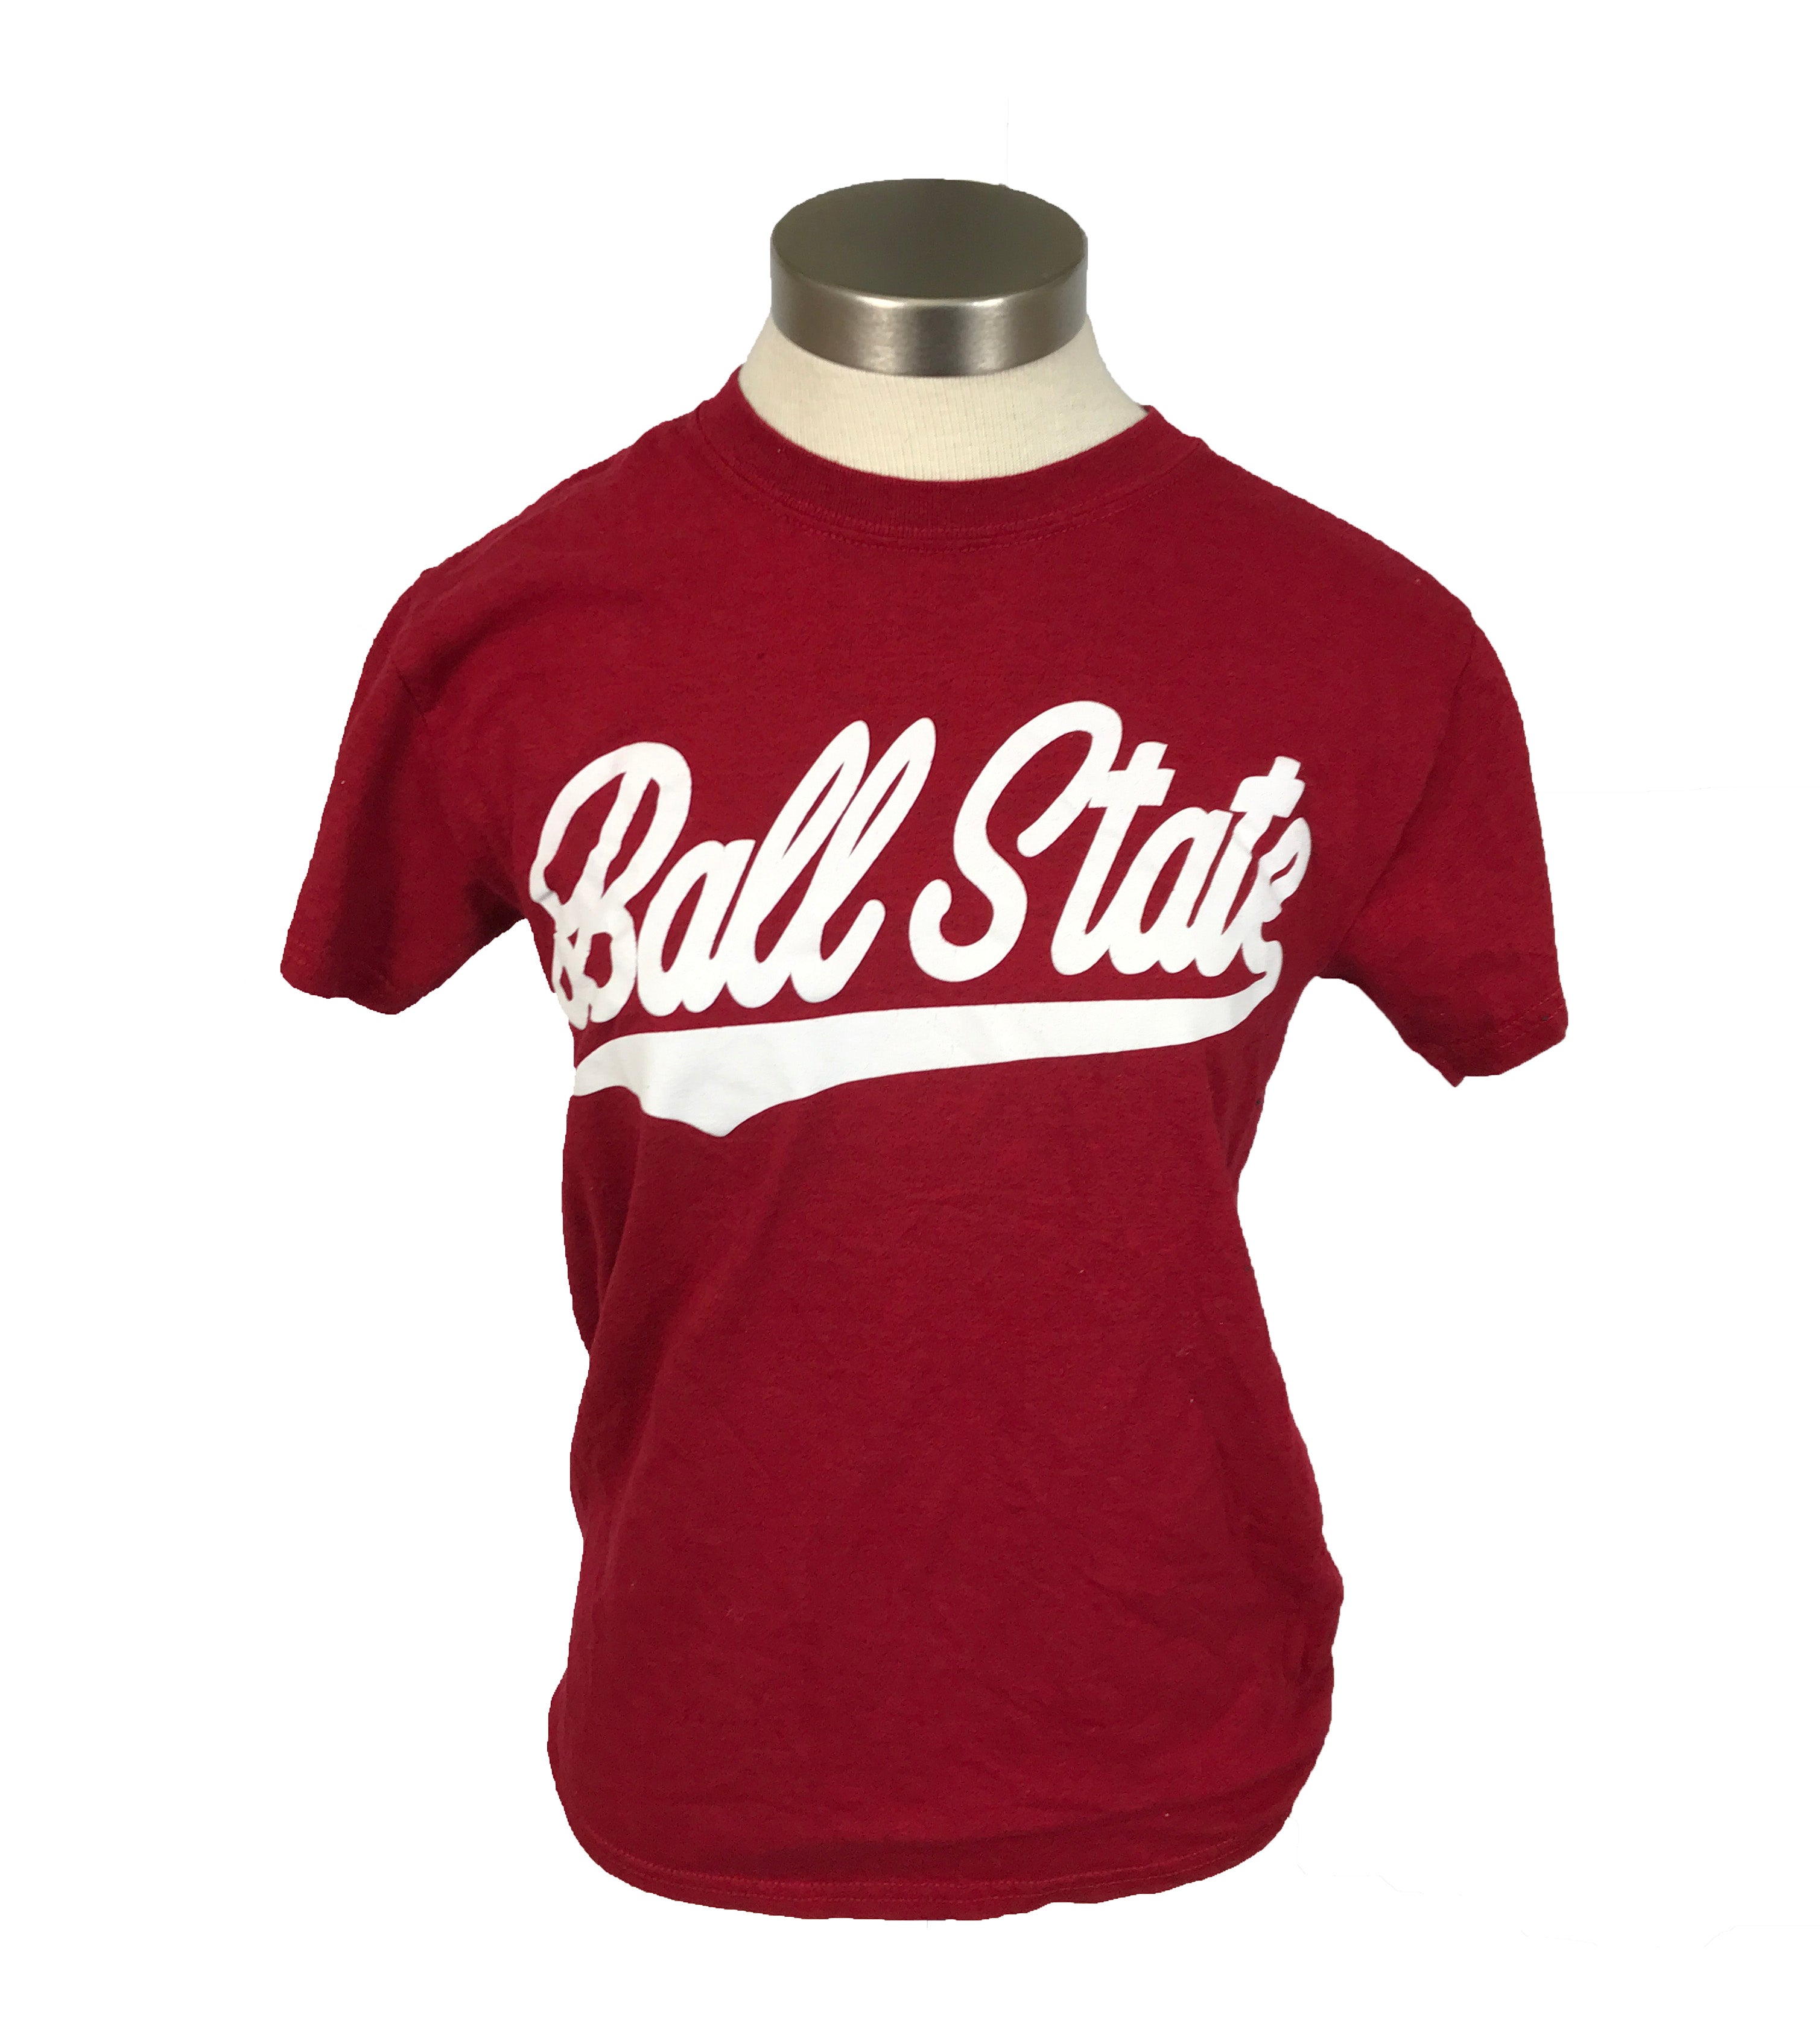 Red Ball State T-Shirt Unisex Size S